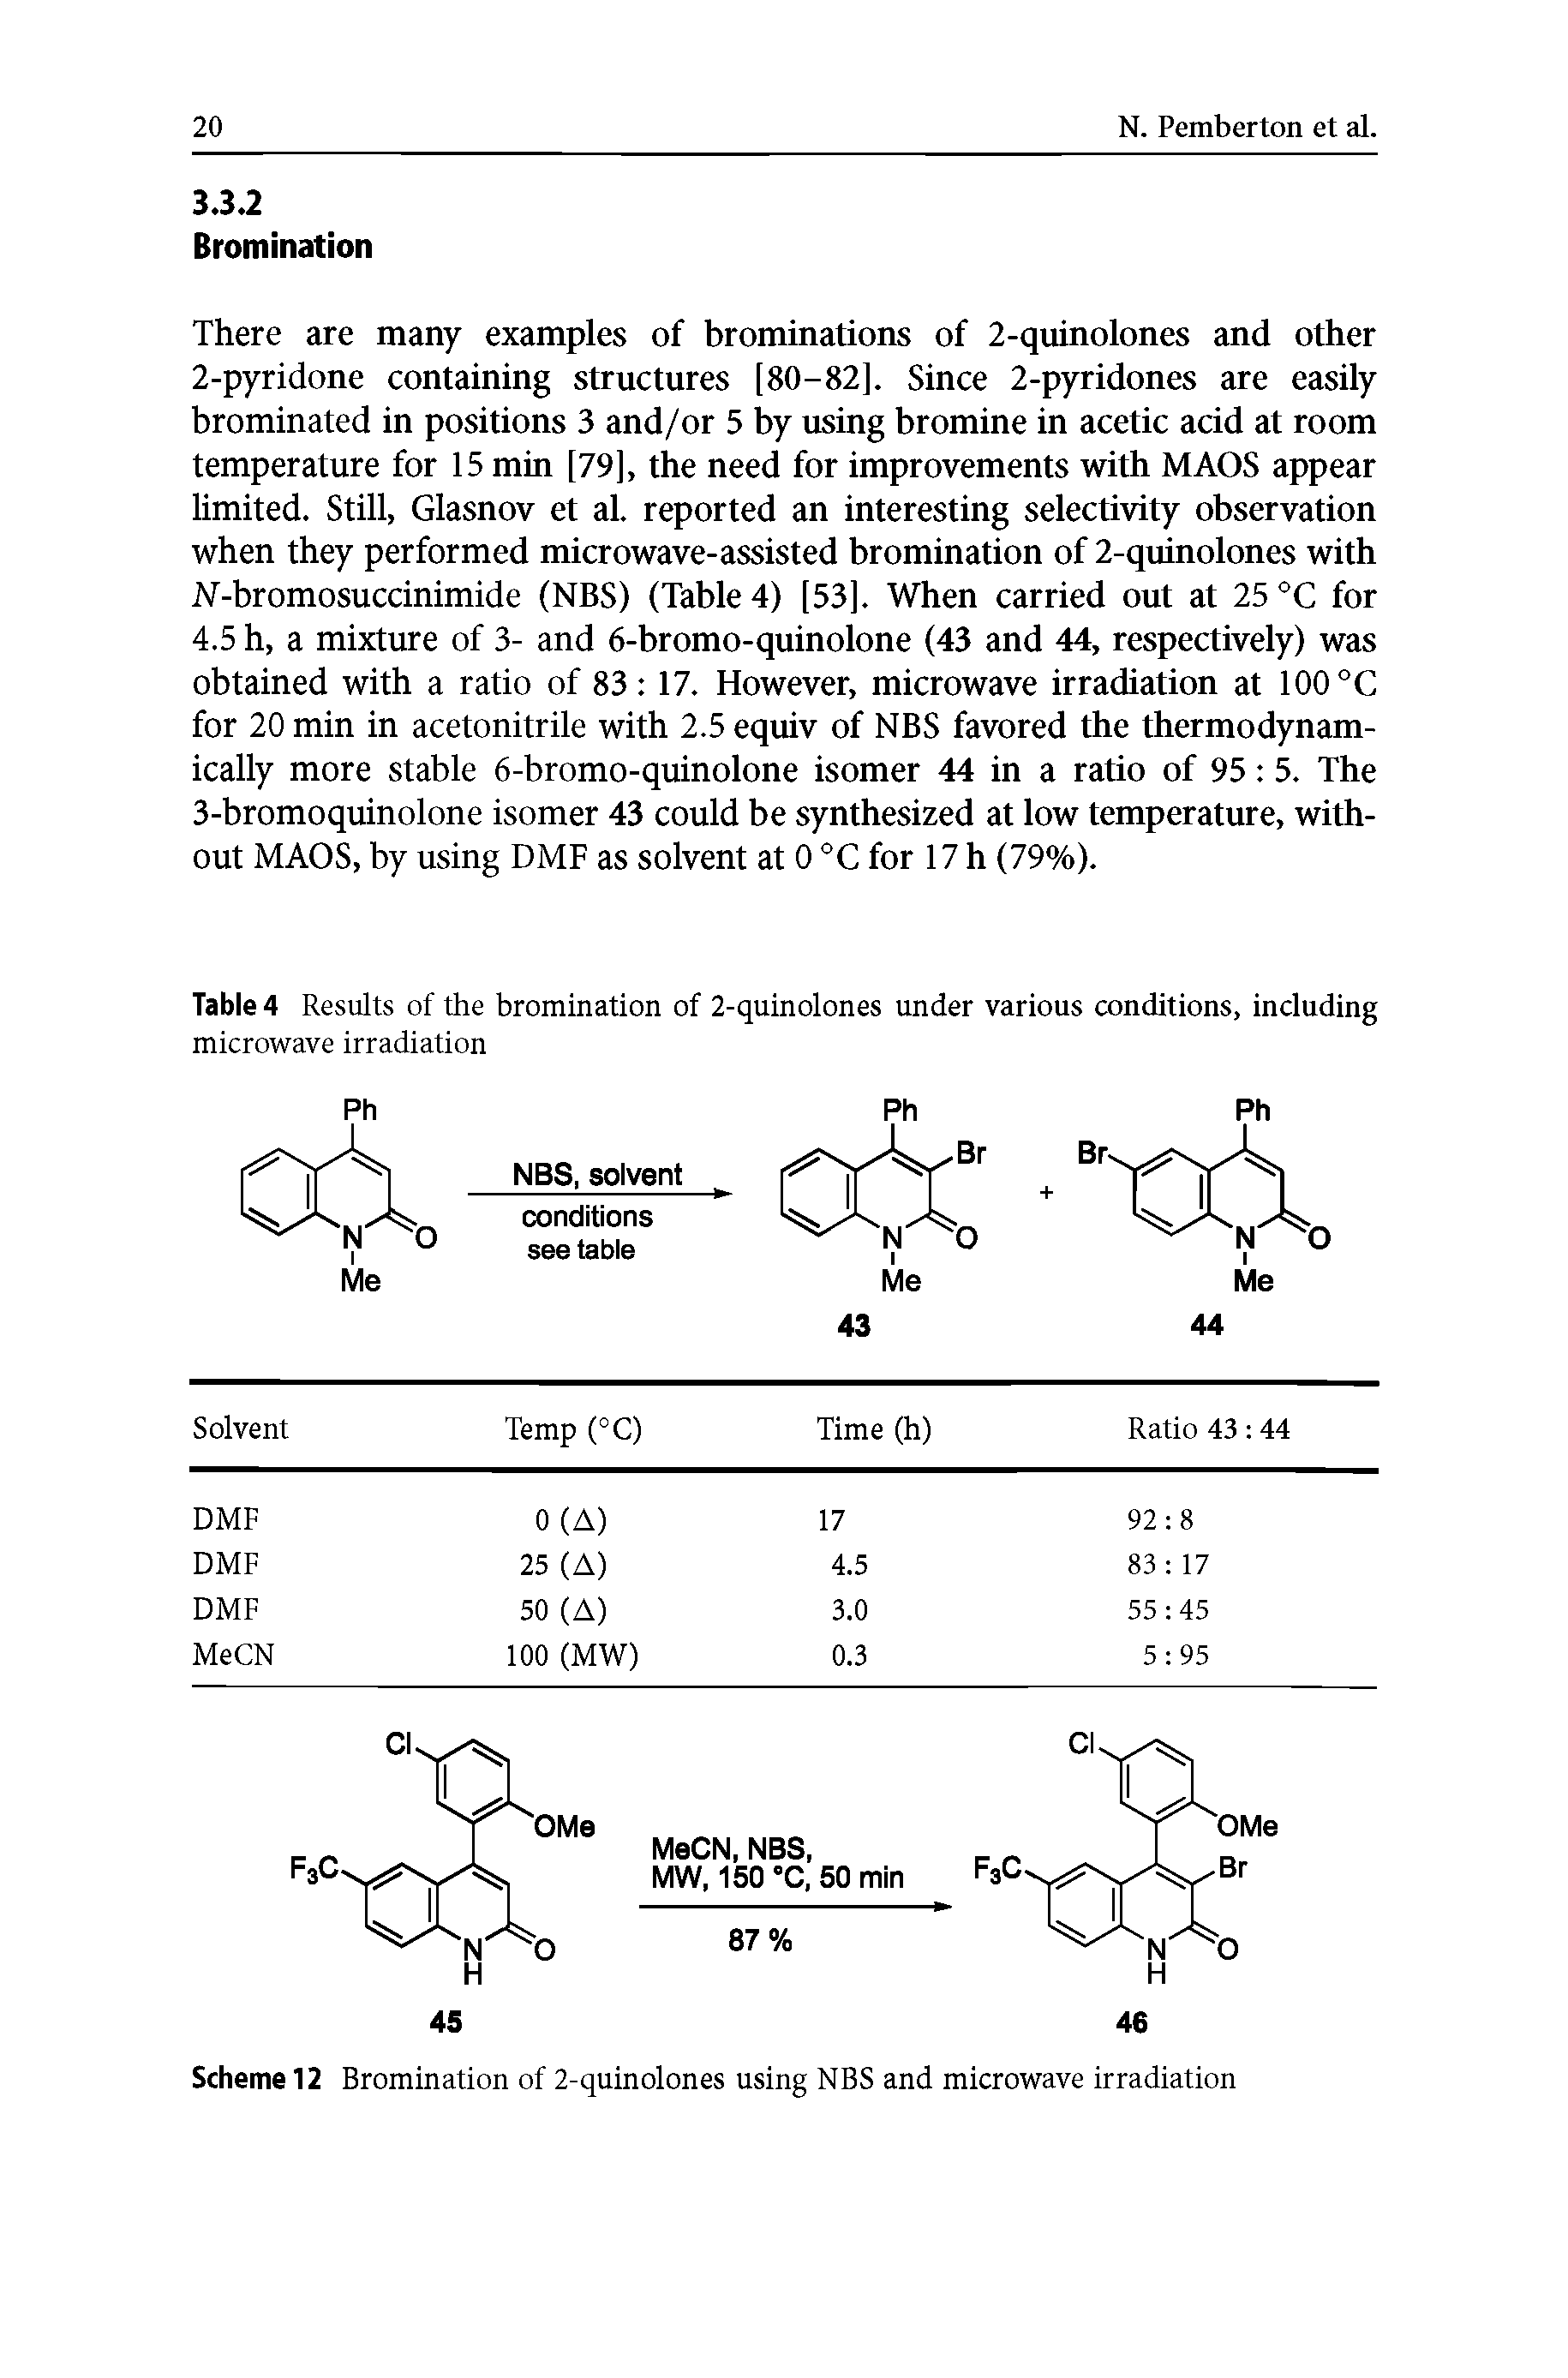 Scheme 12 Bromination of 2-quinolones using NBS and microwave irradiation...